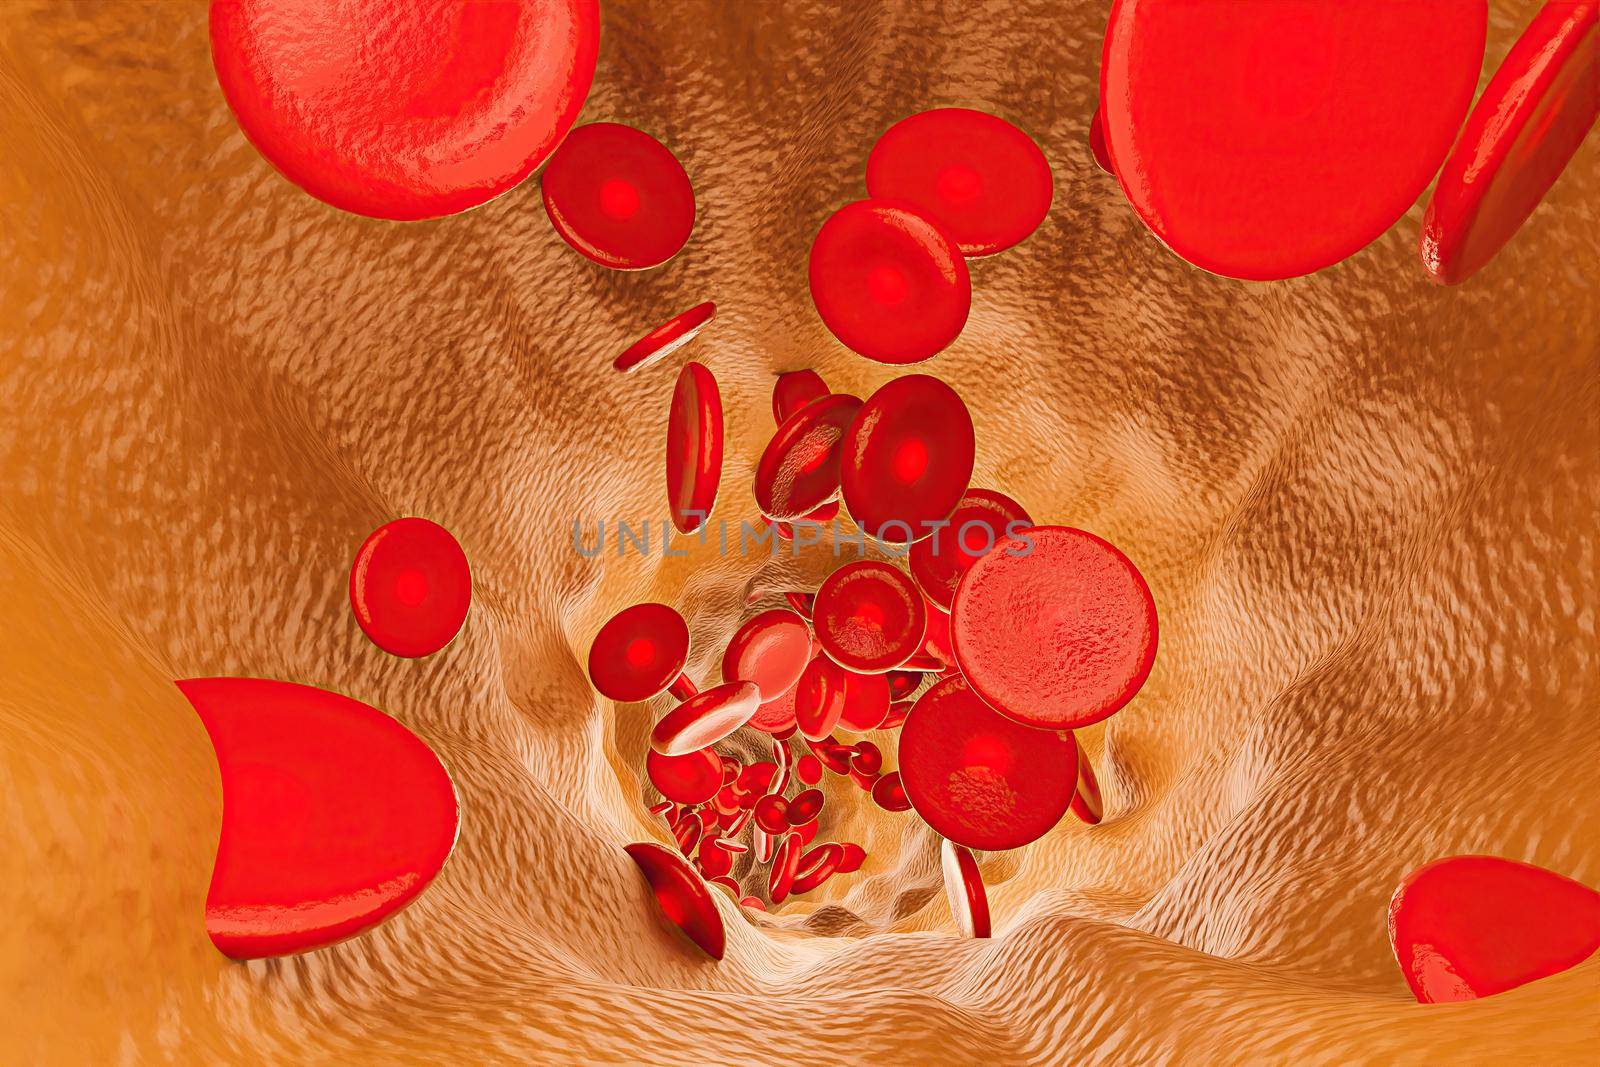 interior of a vein full of cholesterol with red blood cells stuck in it. 3d rendering